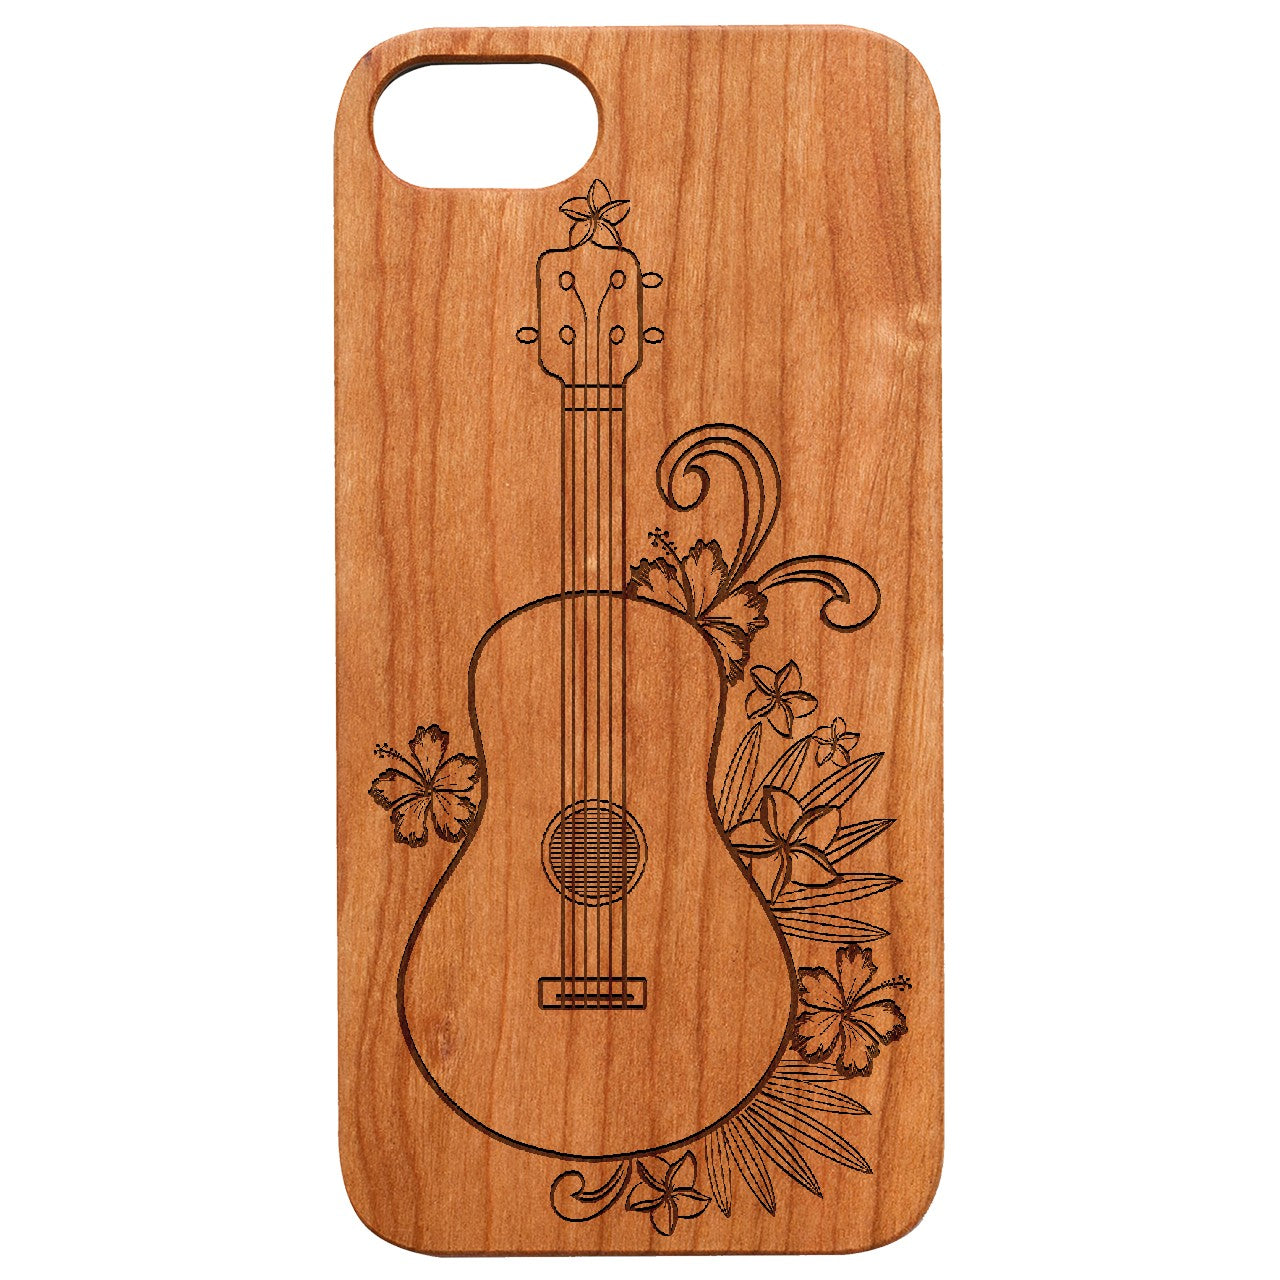  Ukelele With Flowers - Engraved - Wooden Phone Case - IPhone 13 Models